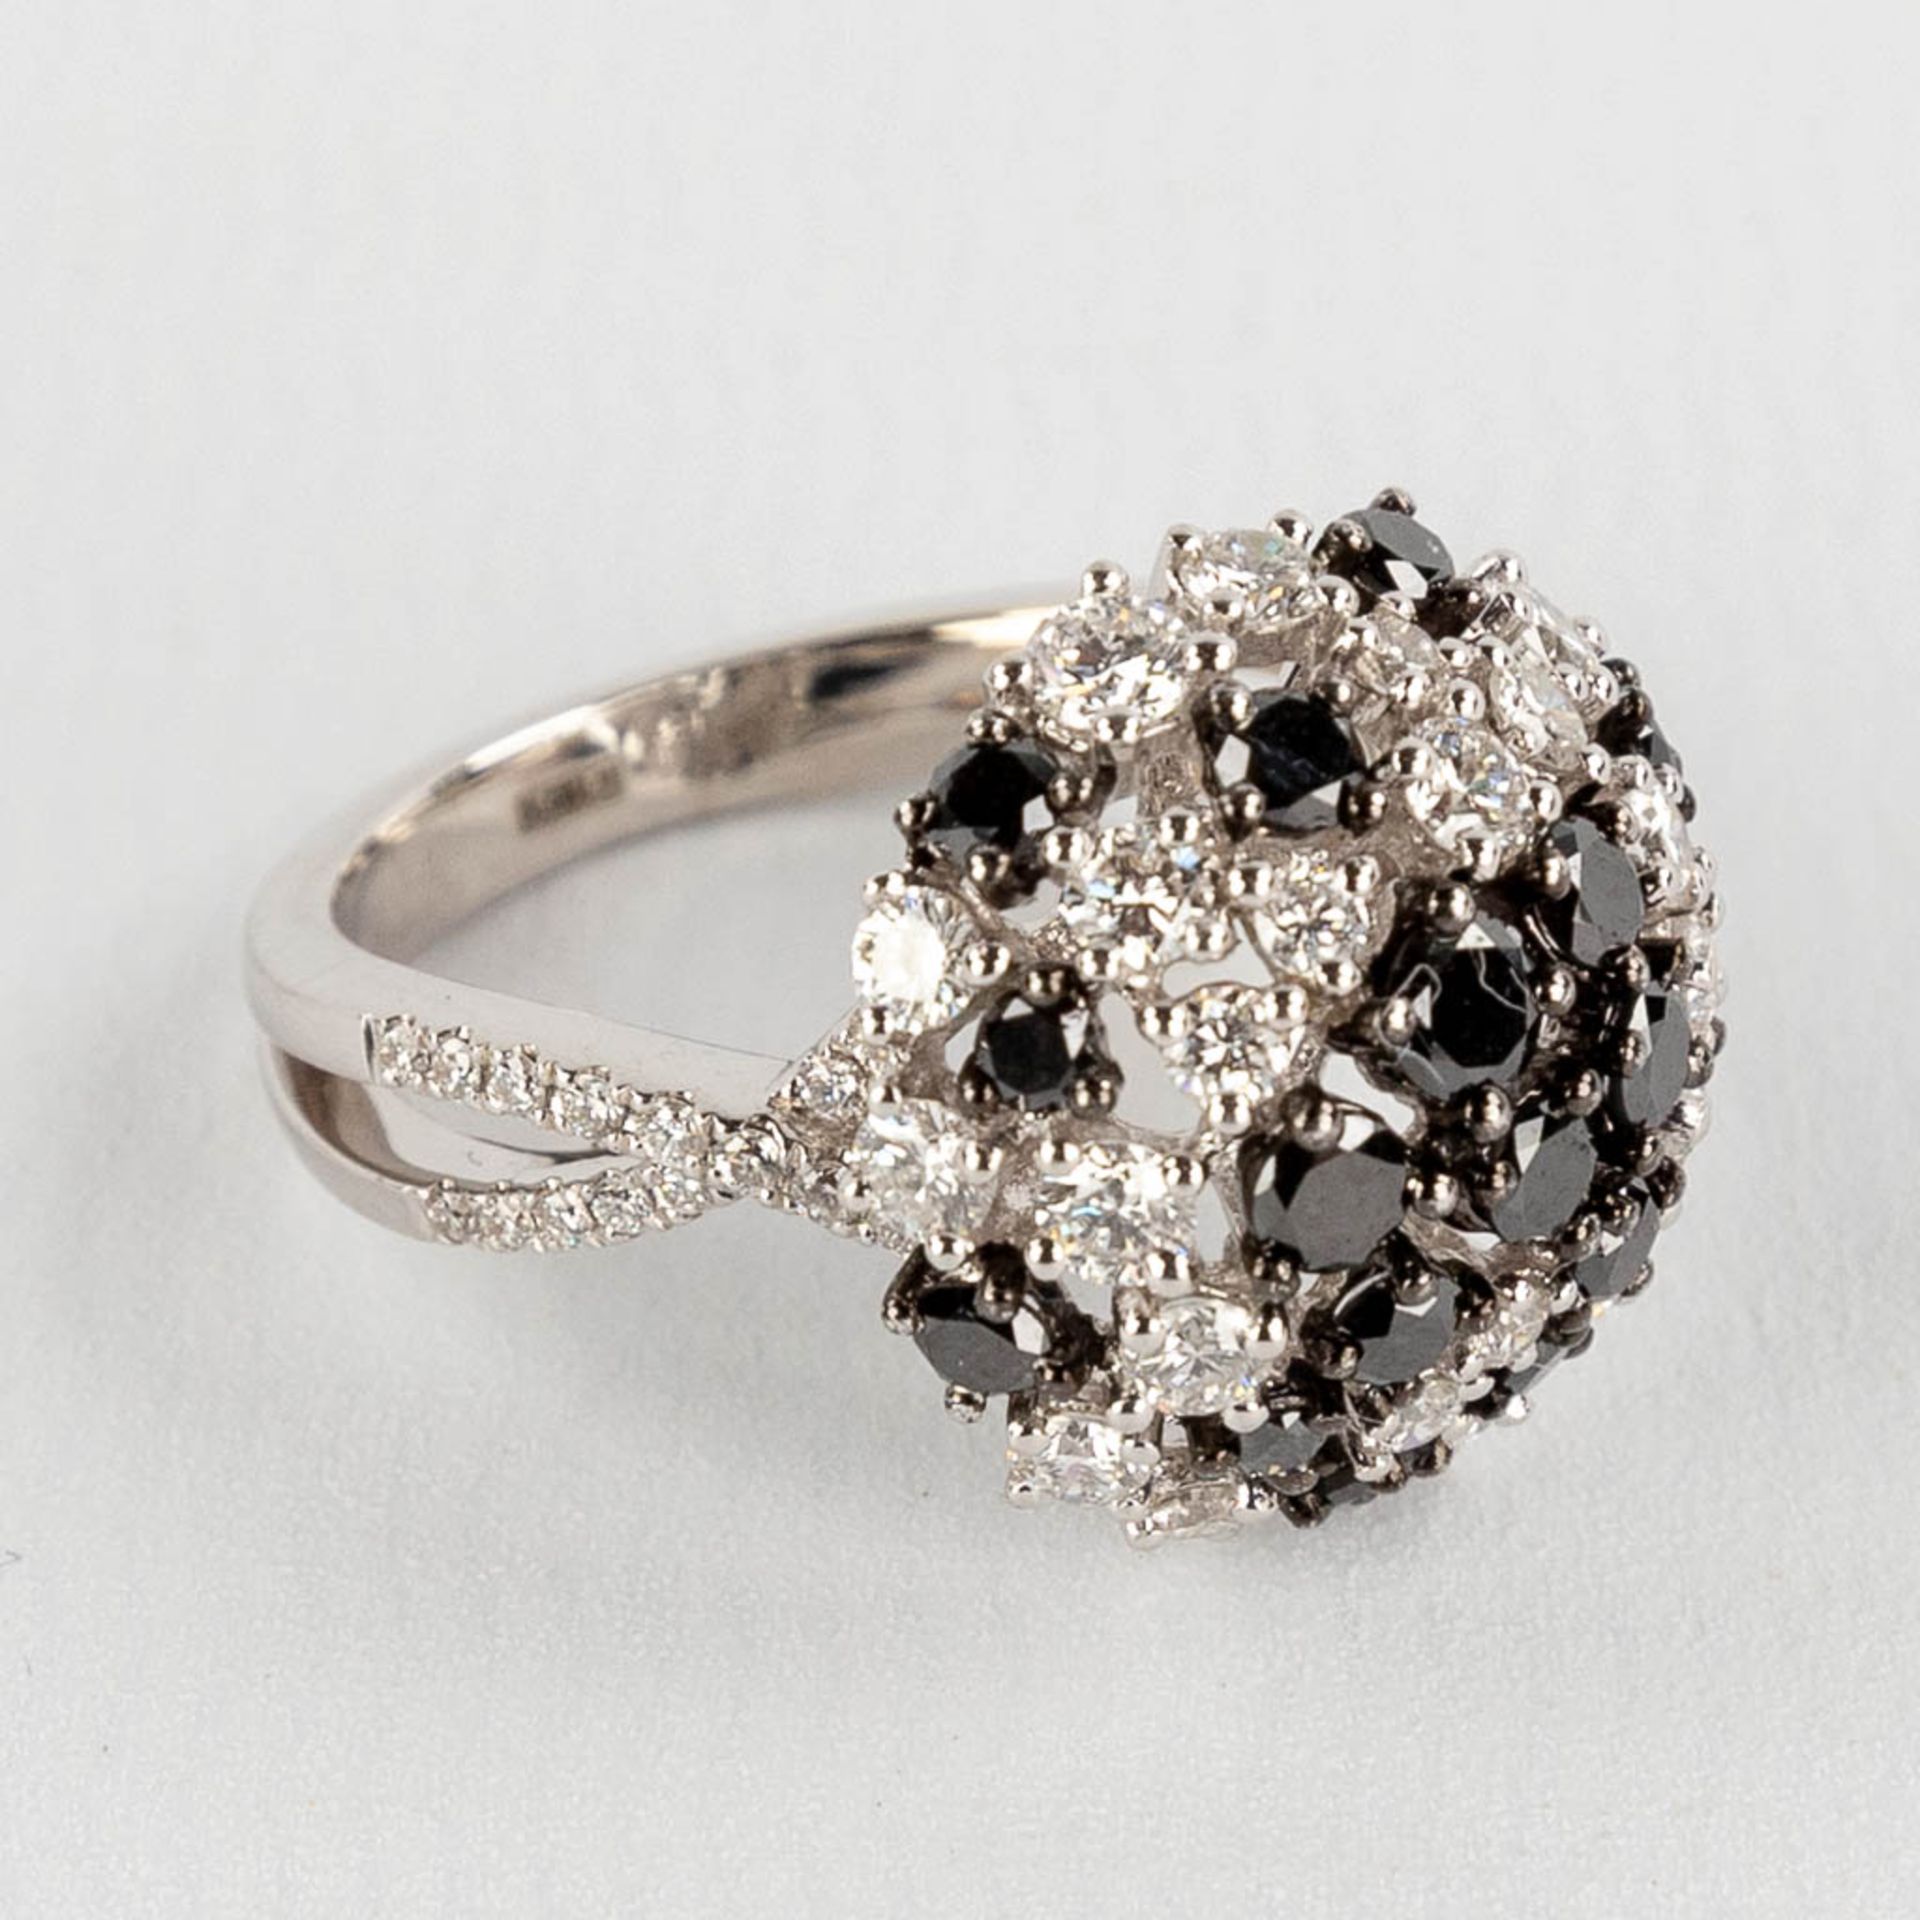 A ring, 18kt white gold with black and white diamonds, total approx. 1.81 ct. Ring size 54. - Image 3 of 10